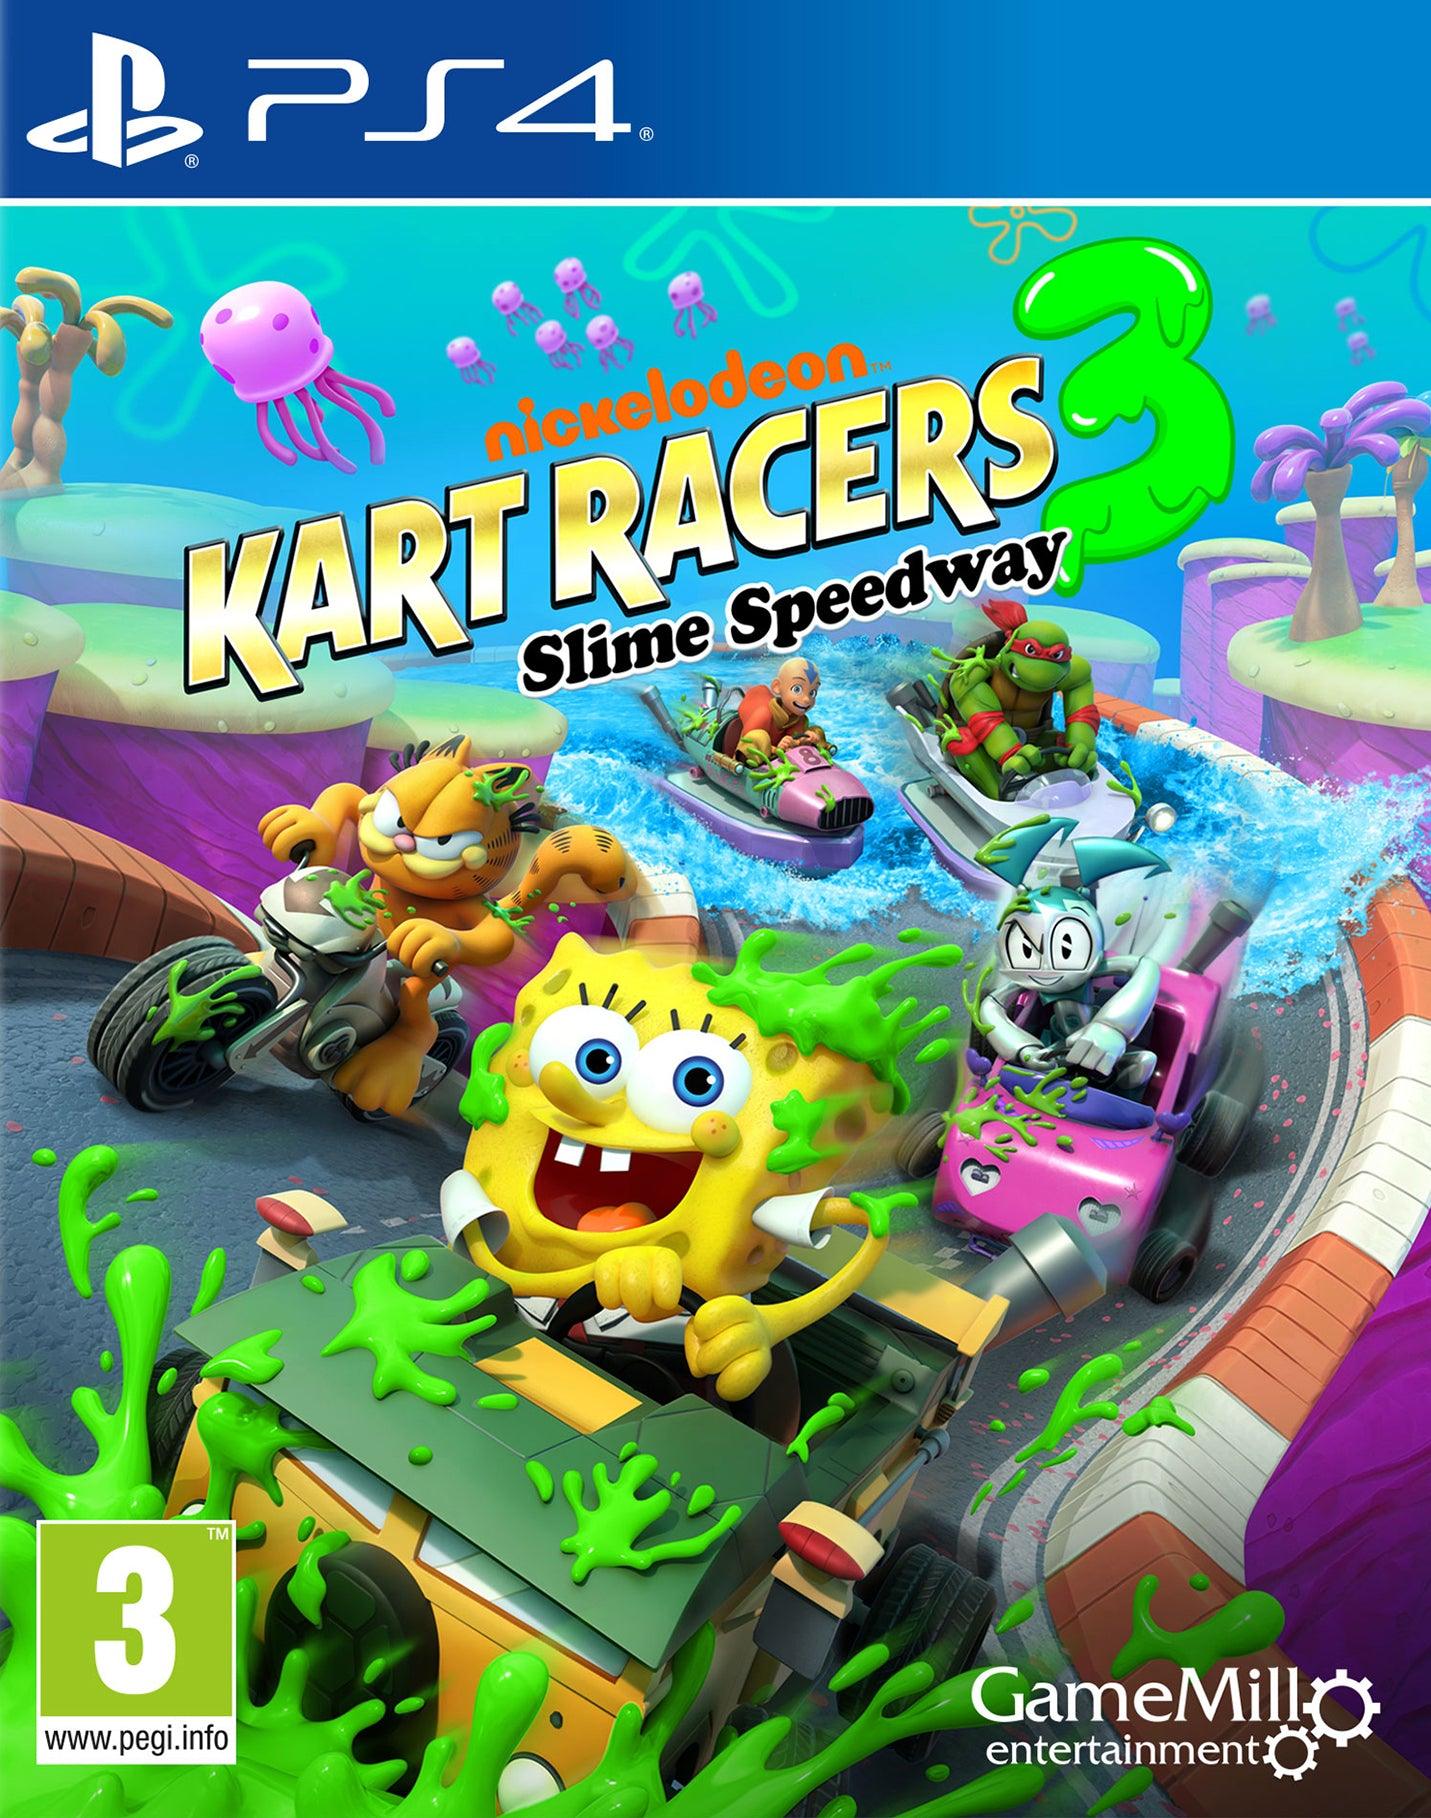 Kart Racers 3 Slime Speedway - Want a New Gadget